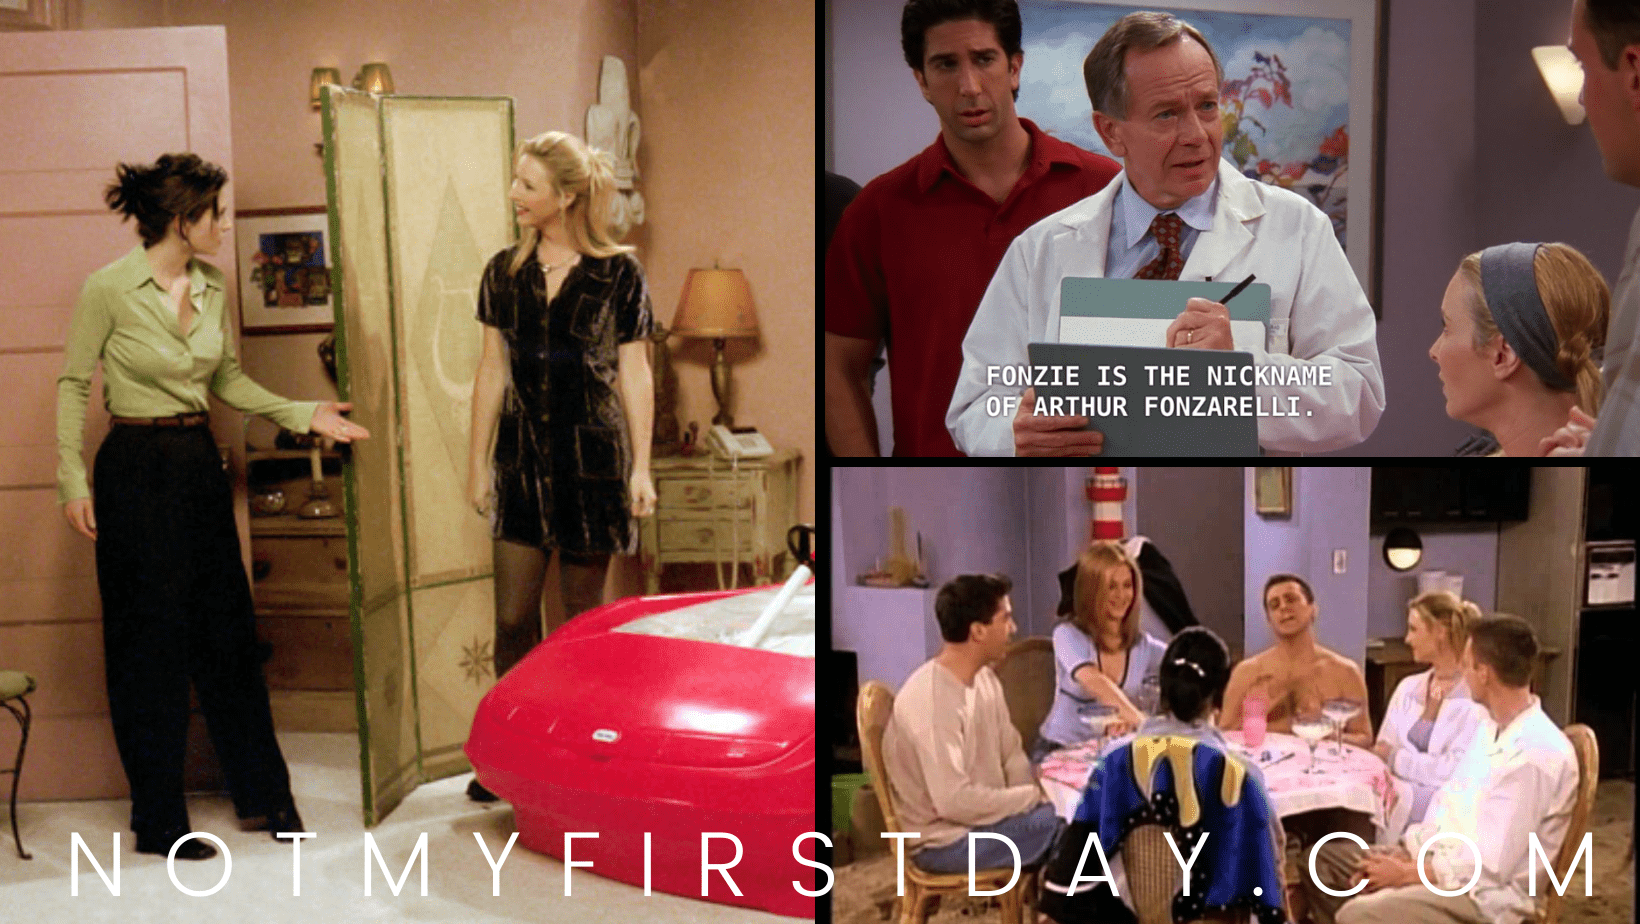 Happy Days on Friends with Three’s Company | Retro Show References